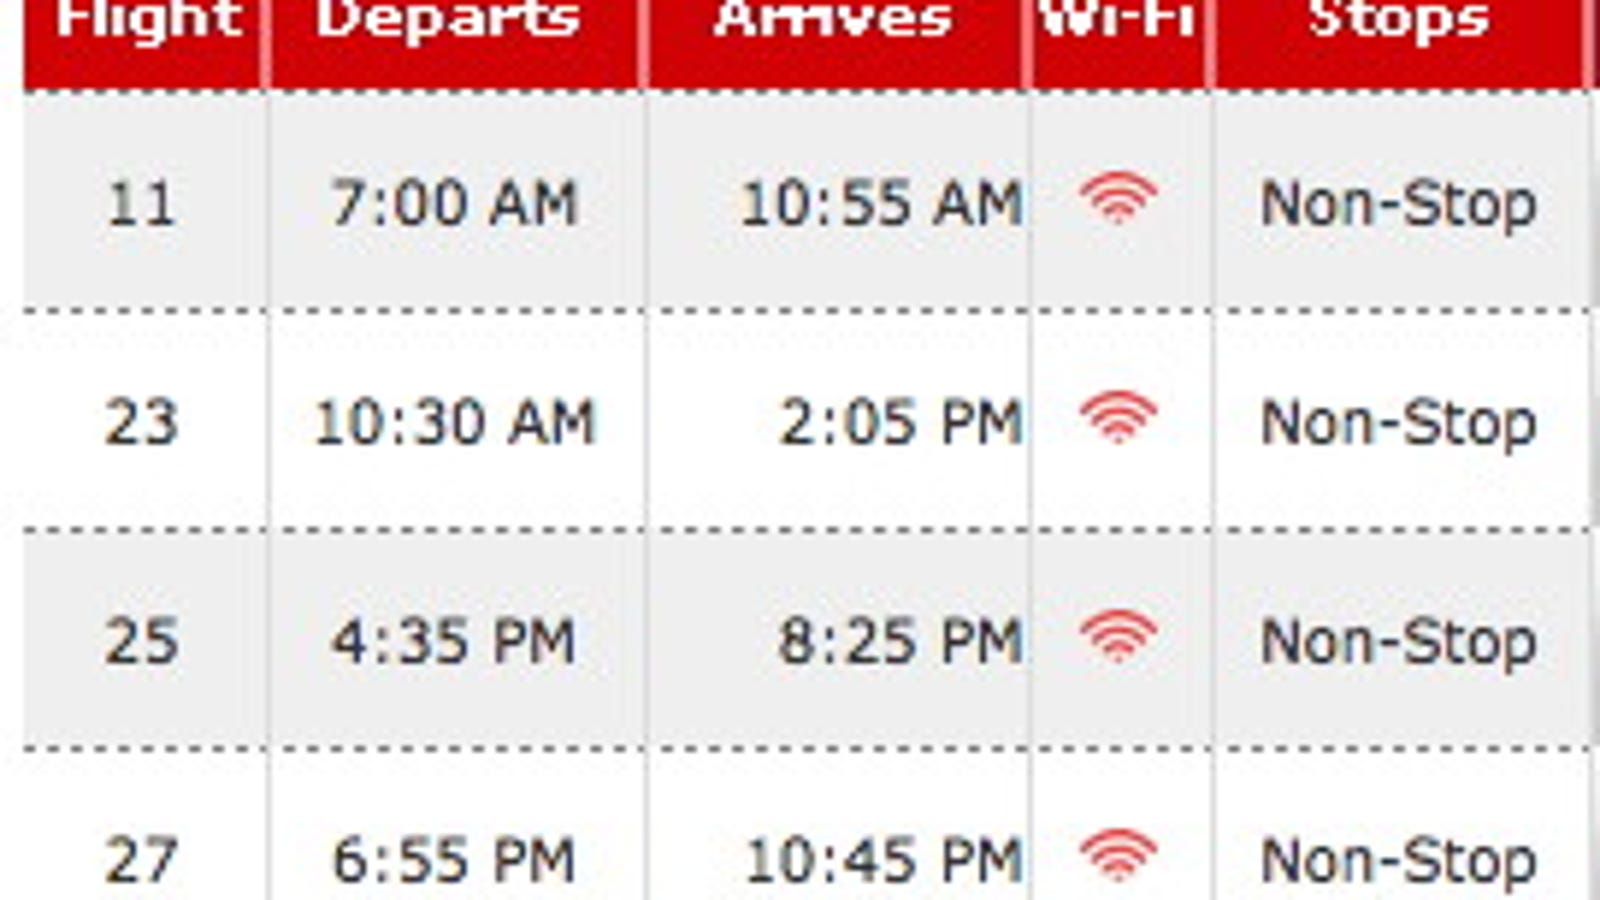 Virgin America Flight Timetables Now Have Wi Fi Ready Status